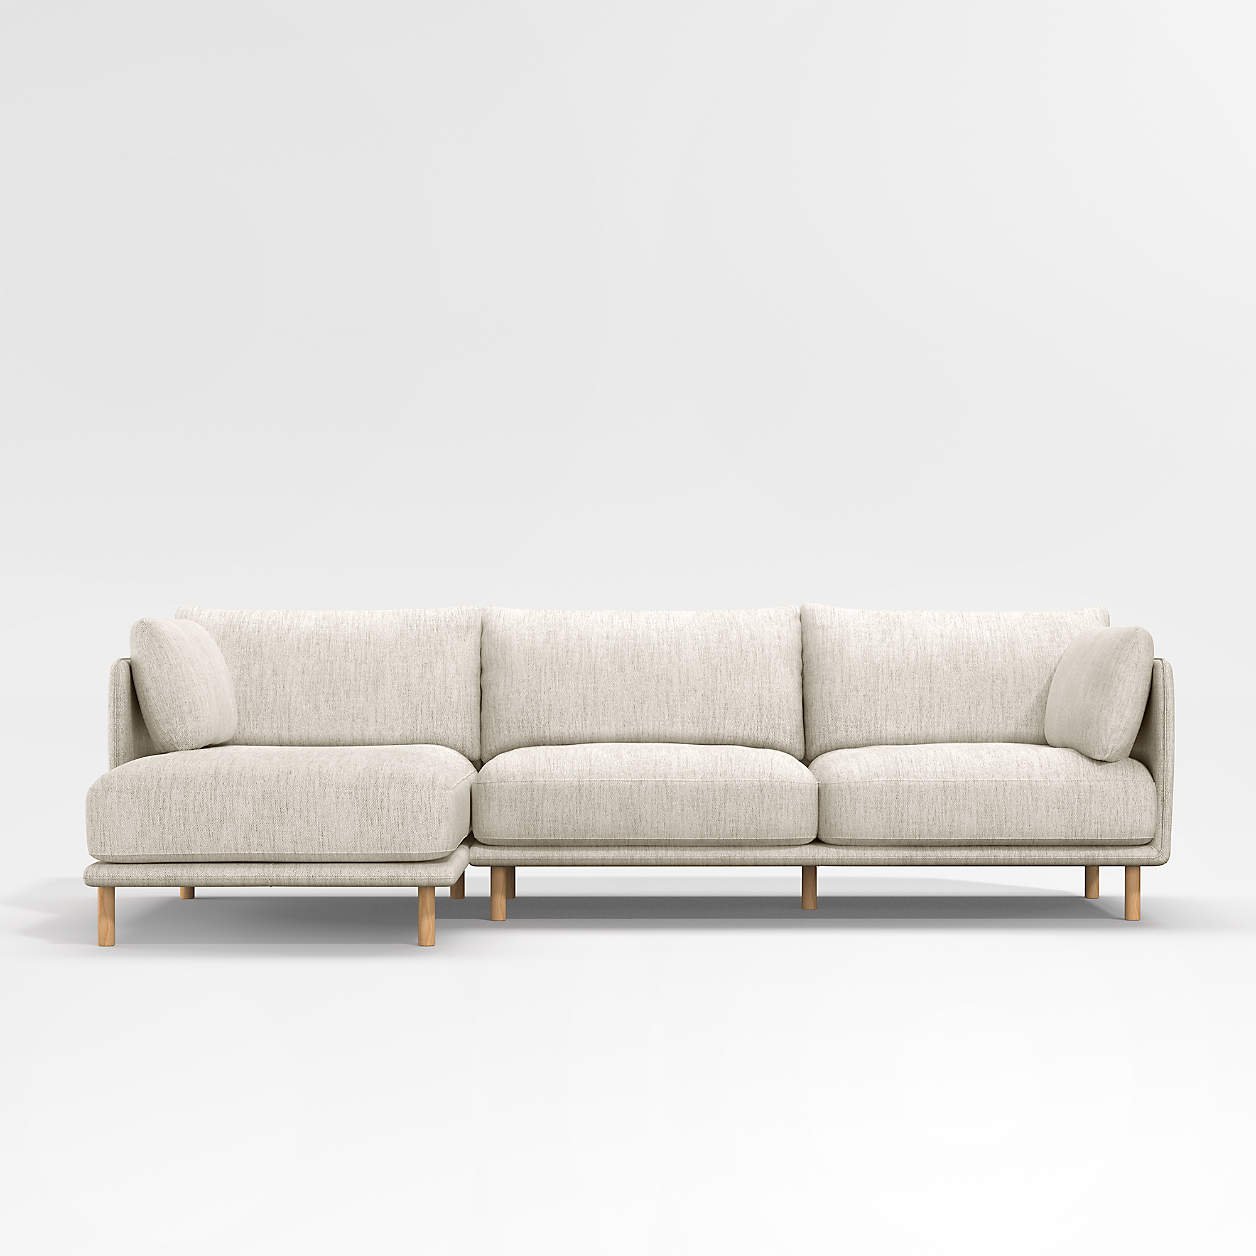 2 Piece Chaise Sectional Sofa